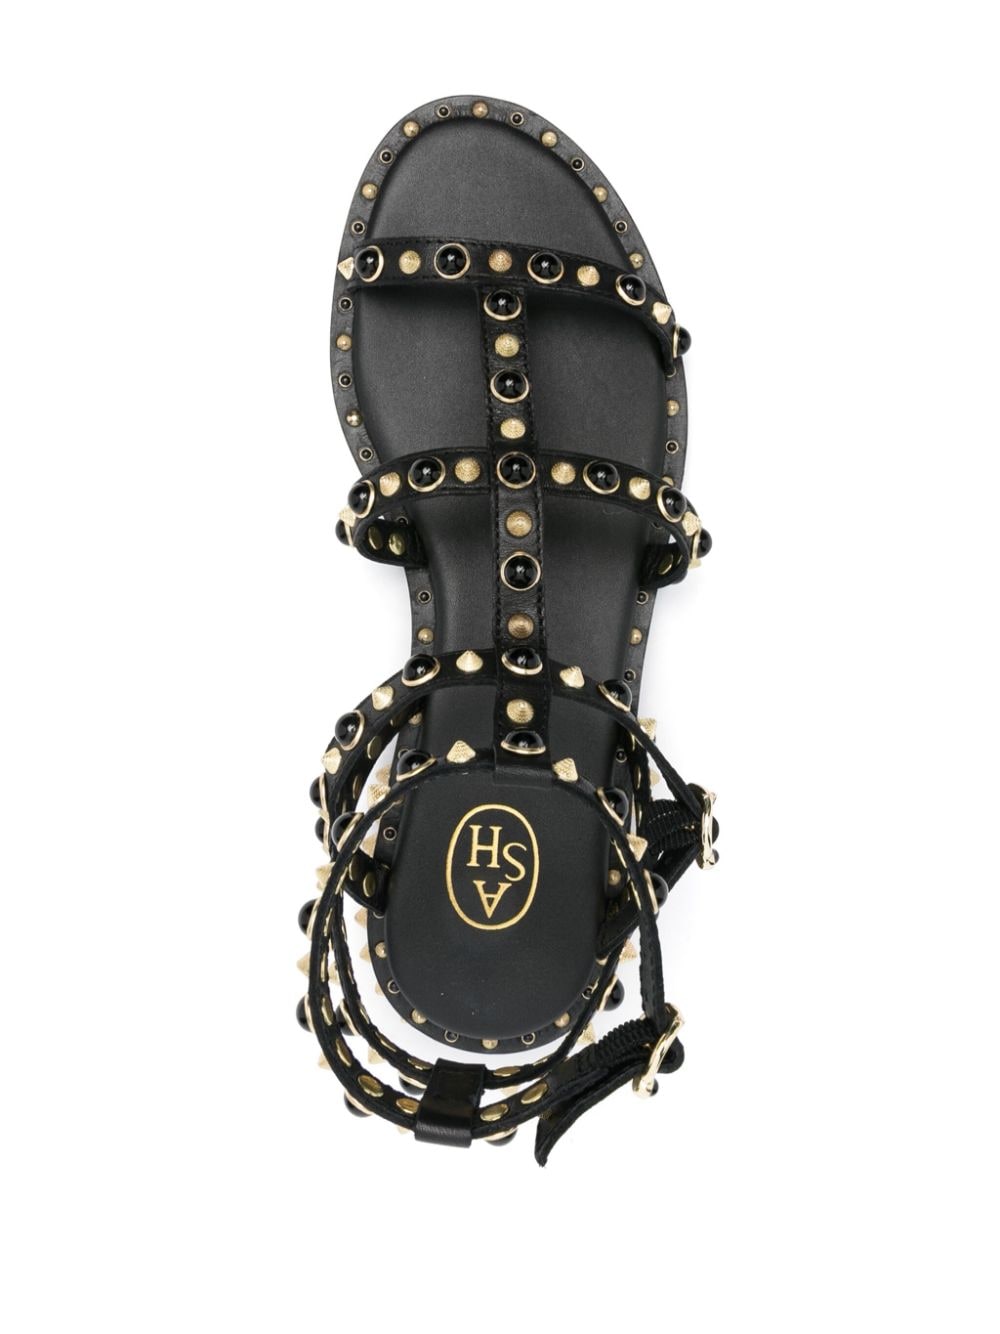 Ash ASH- Peps Studded Leather Sandals